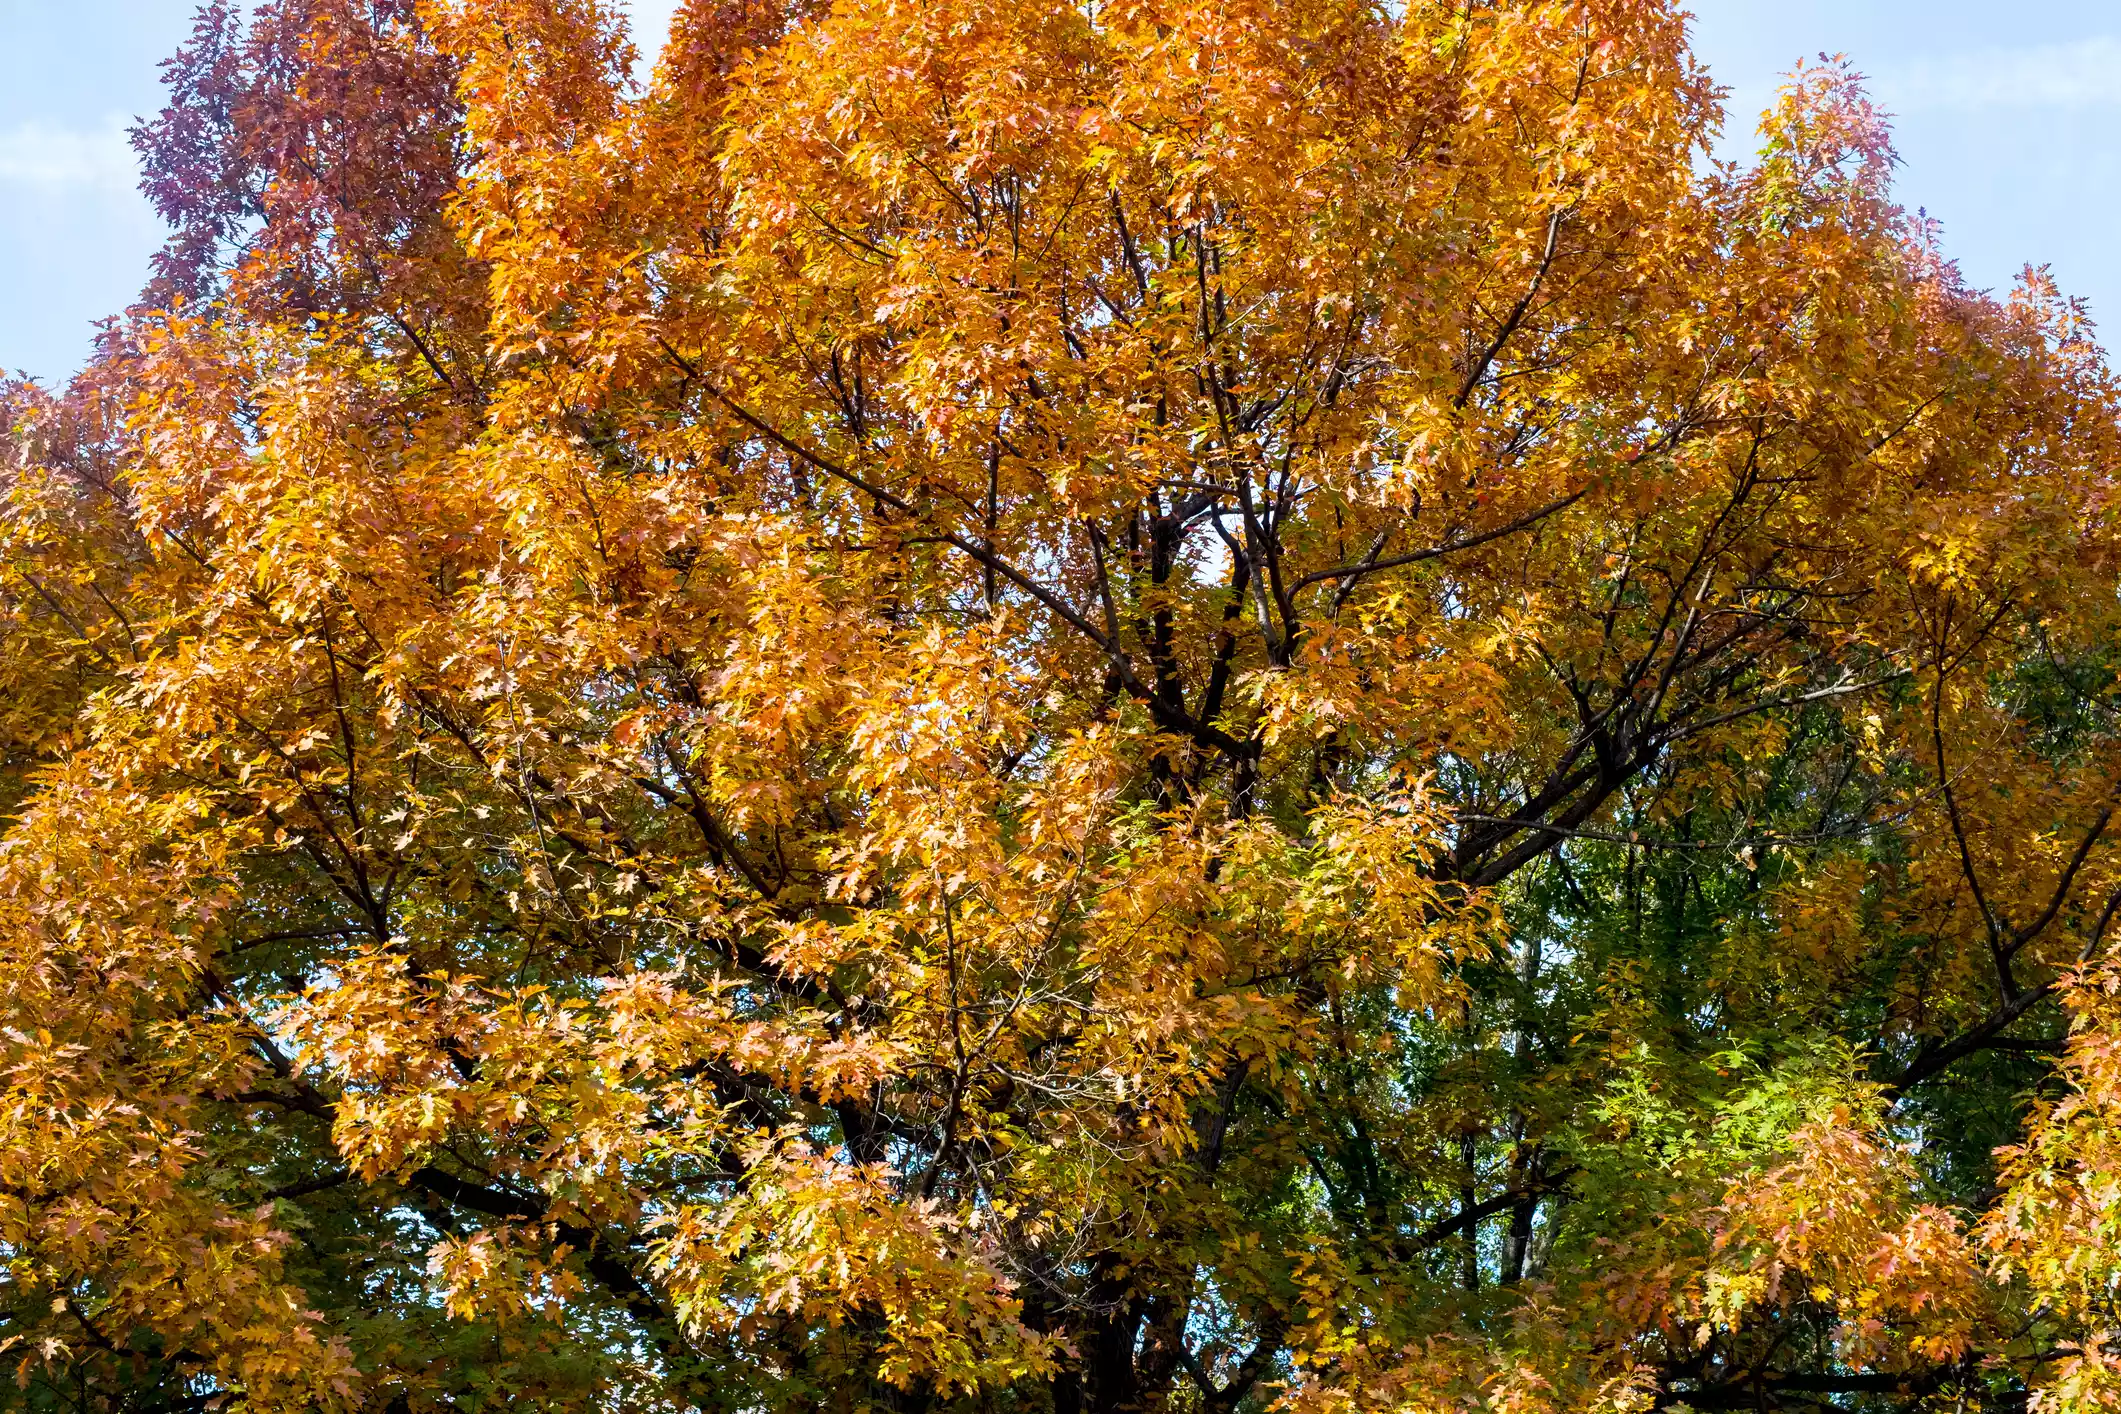 Northern red oak in fall orange and red colors